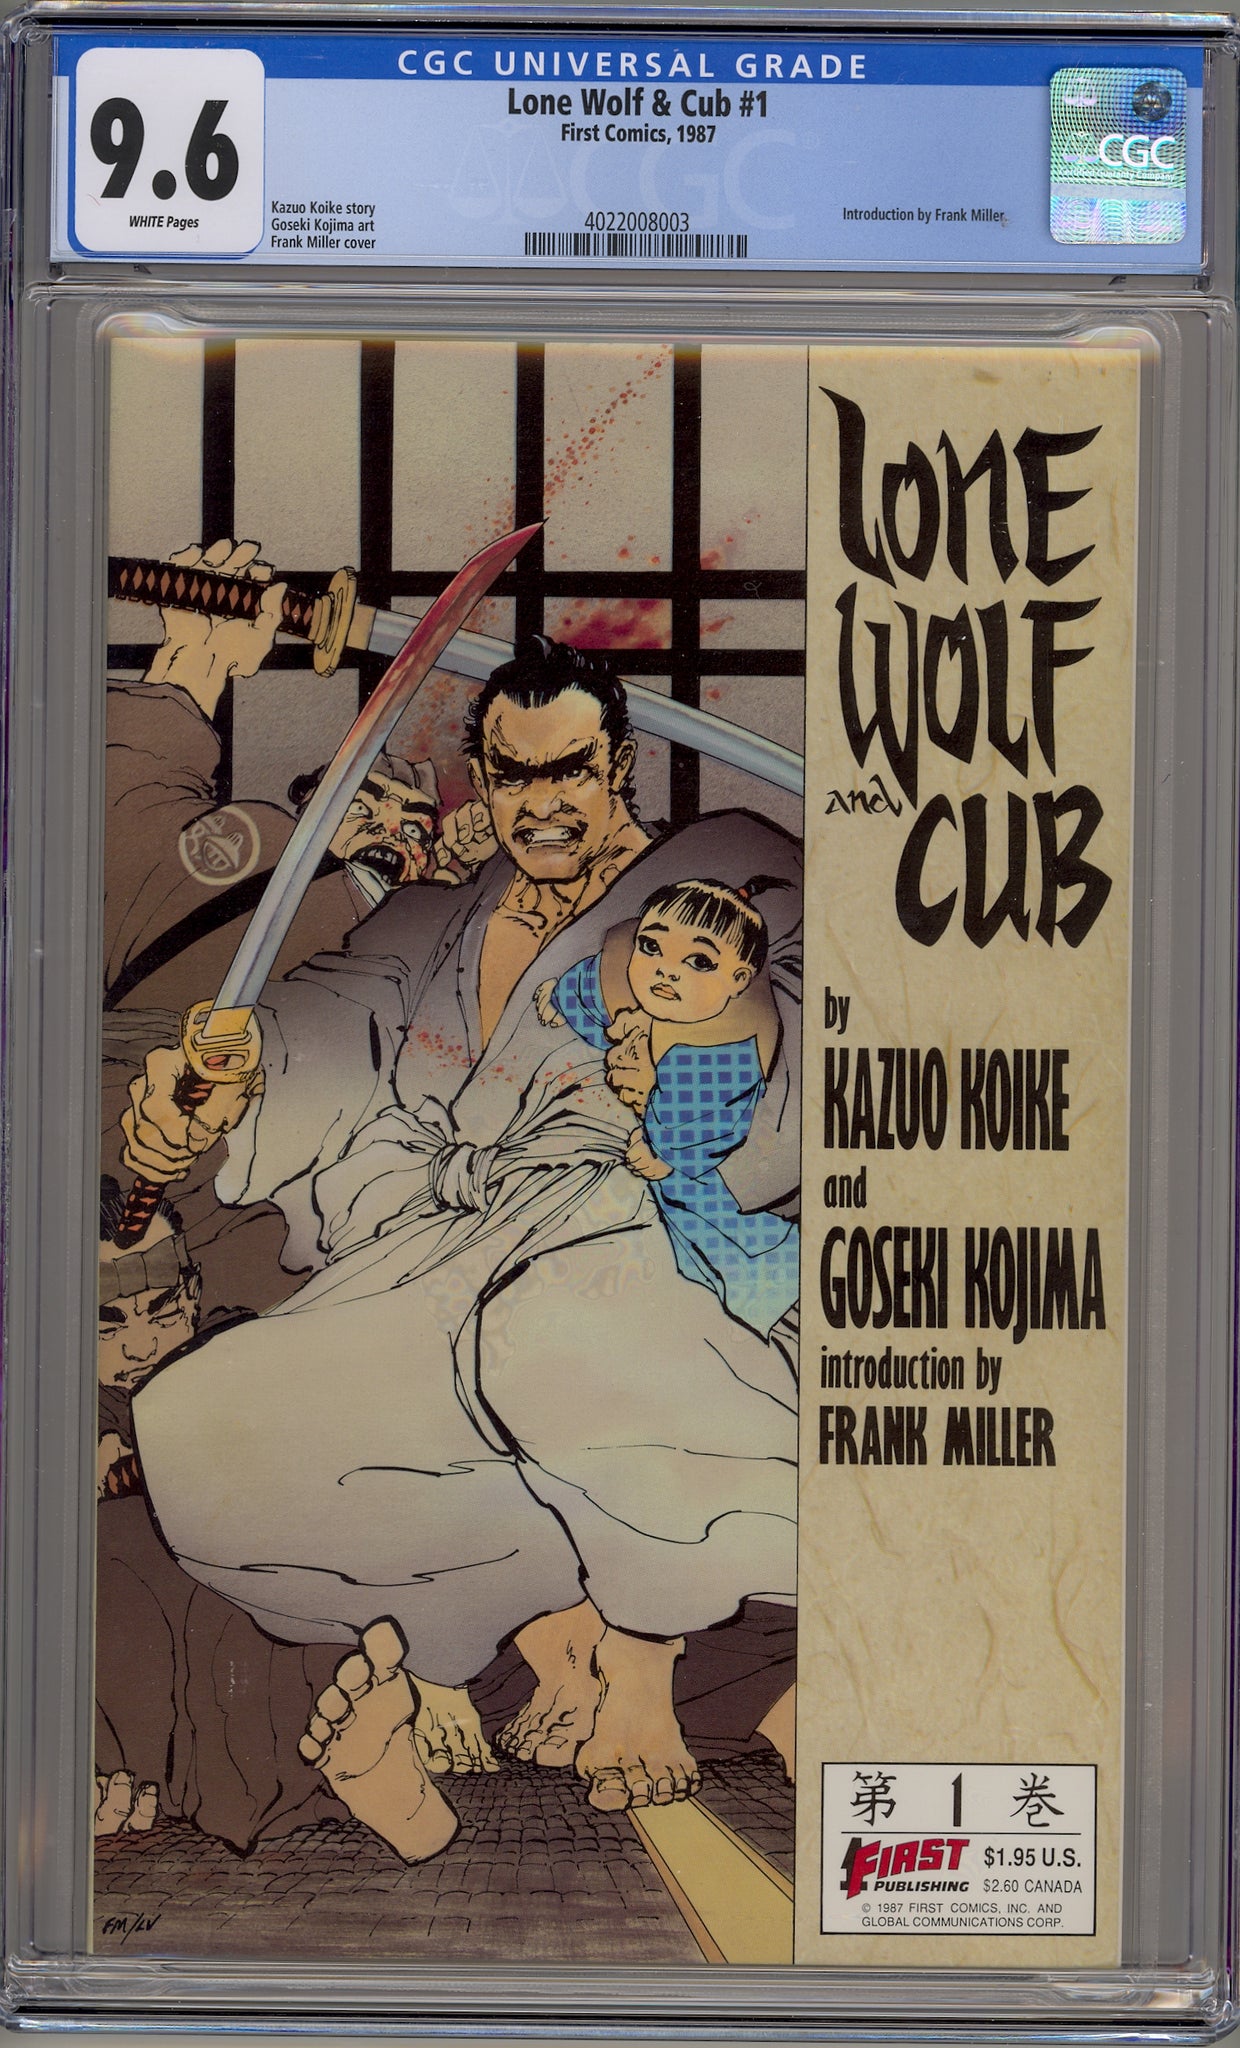 Lone Wolf and Cub #1 (1987)